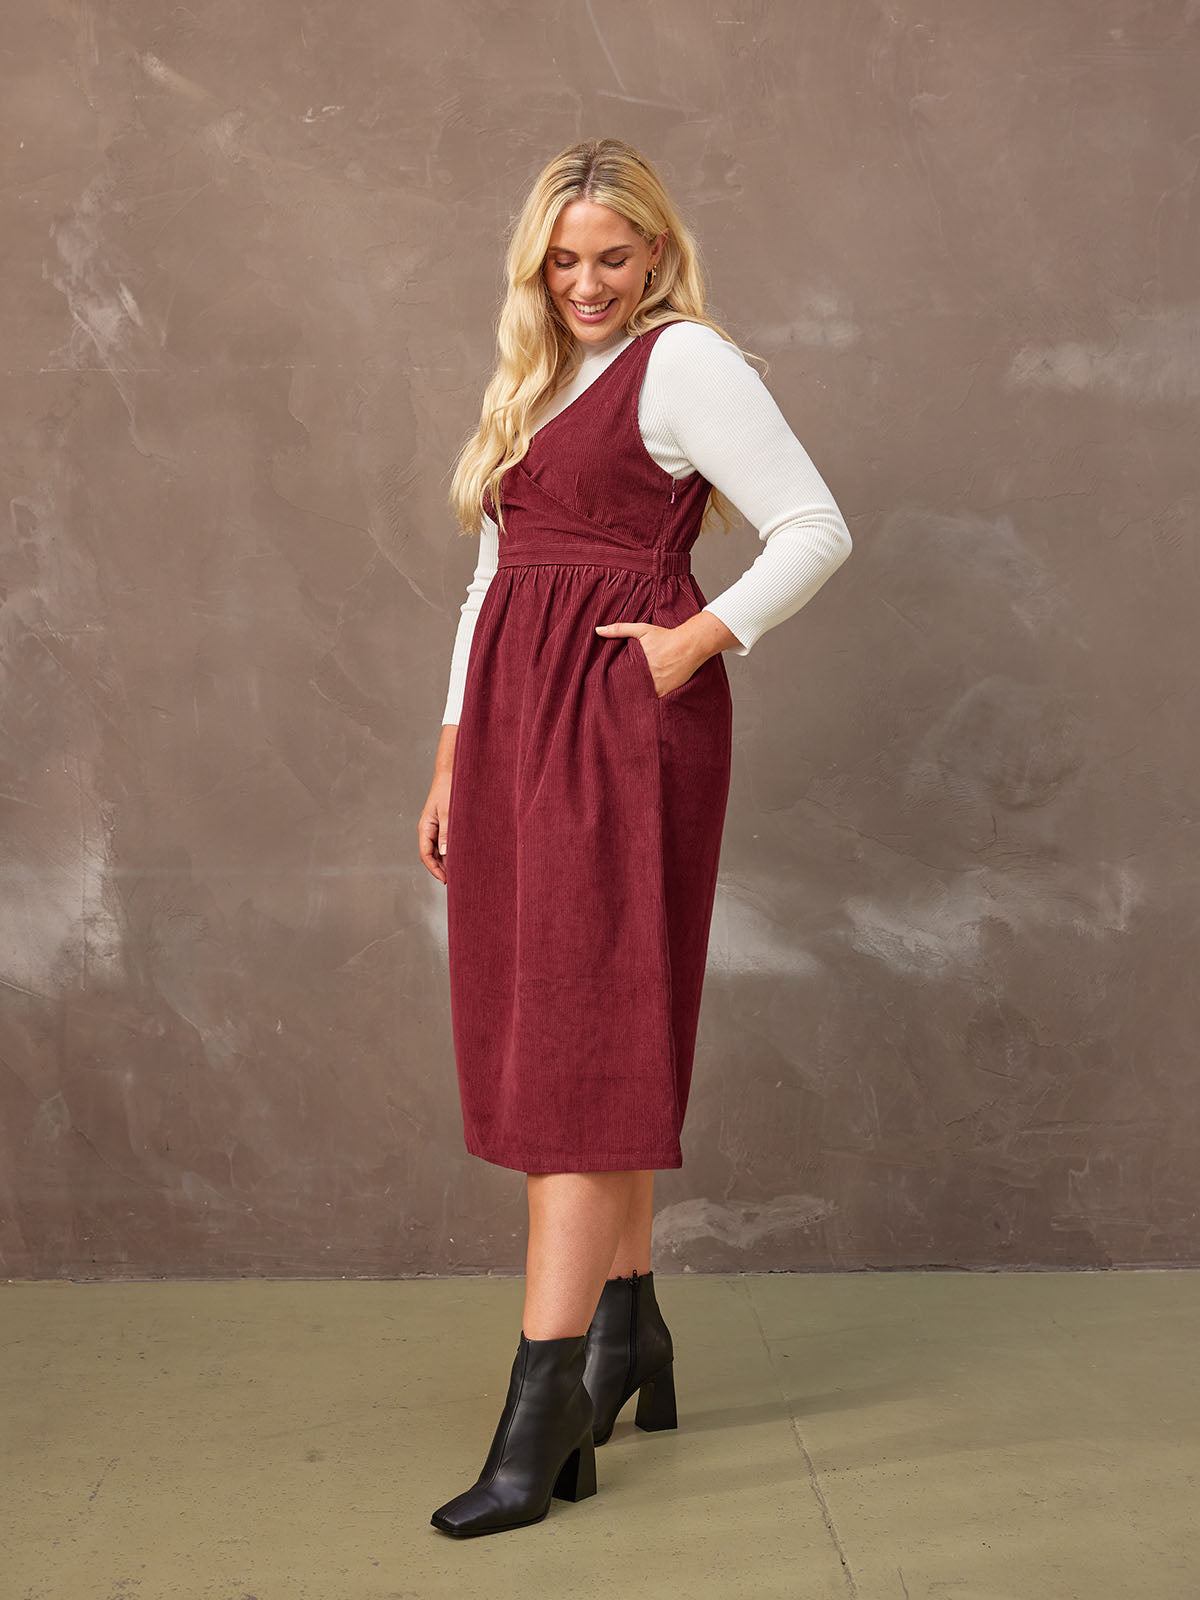 A model poses in the Ally corduroy midi crossover front dress, standing to the side and featuring the pocket detail of the dress.